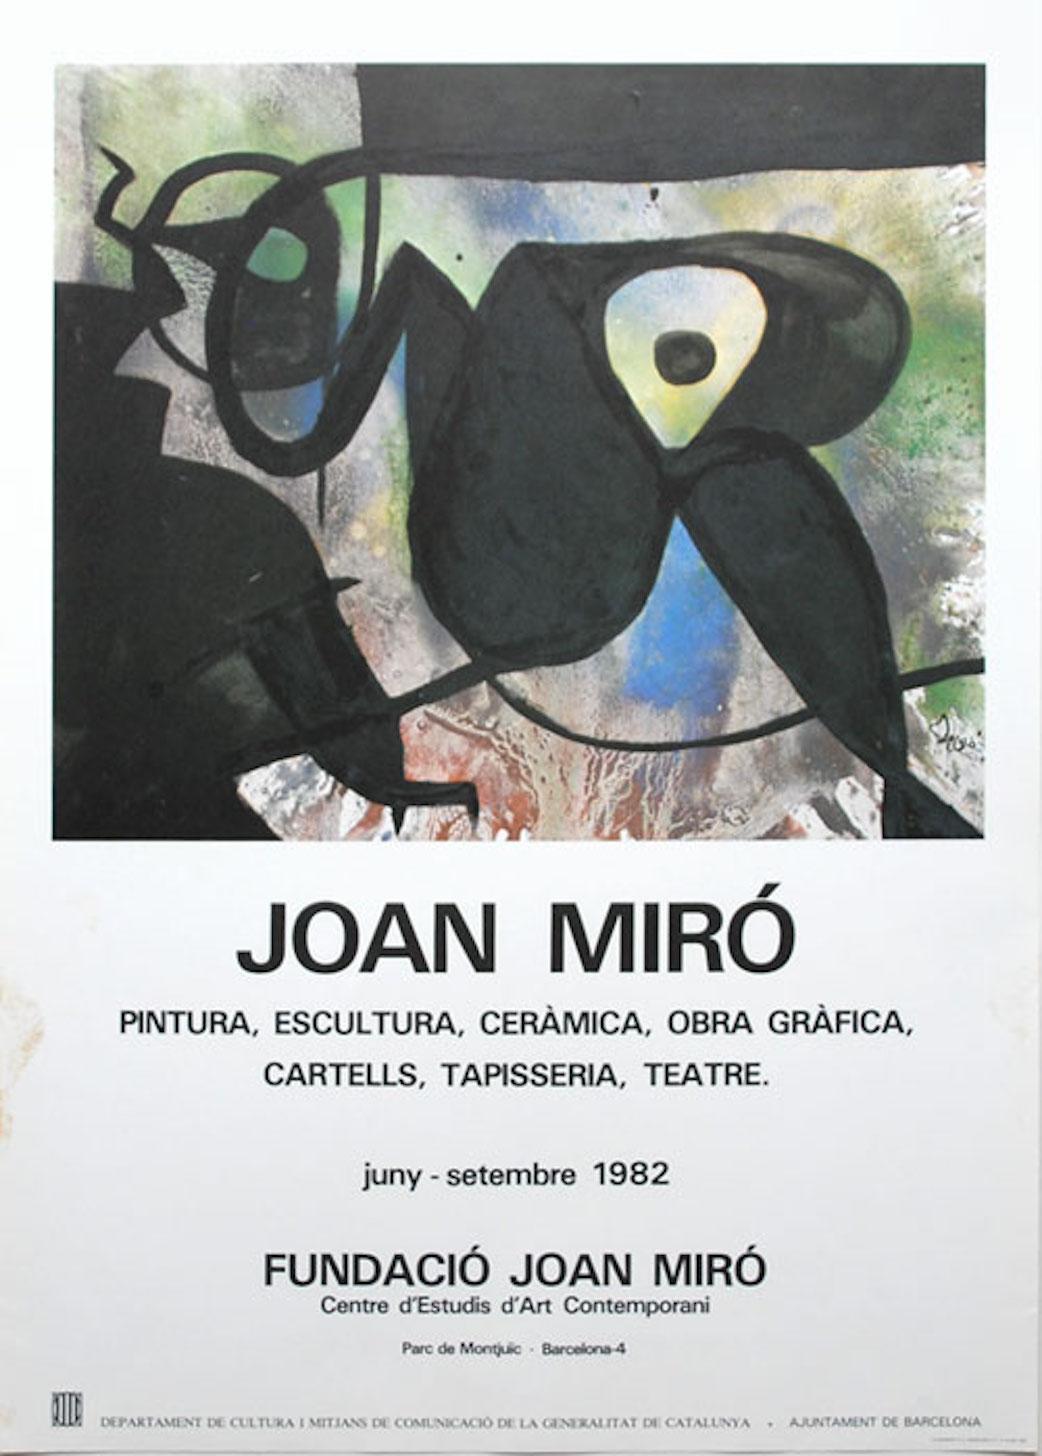 Exhibition poster
Created on the occasion of the exhibition in Barcelona in 1982
In good condition